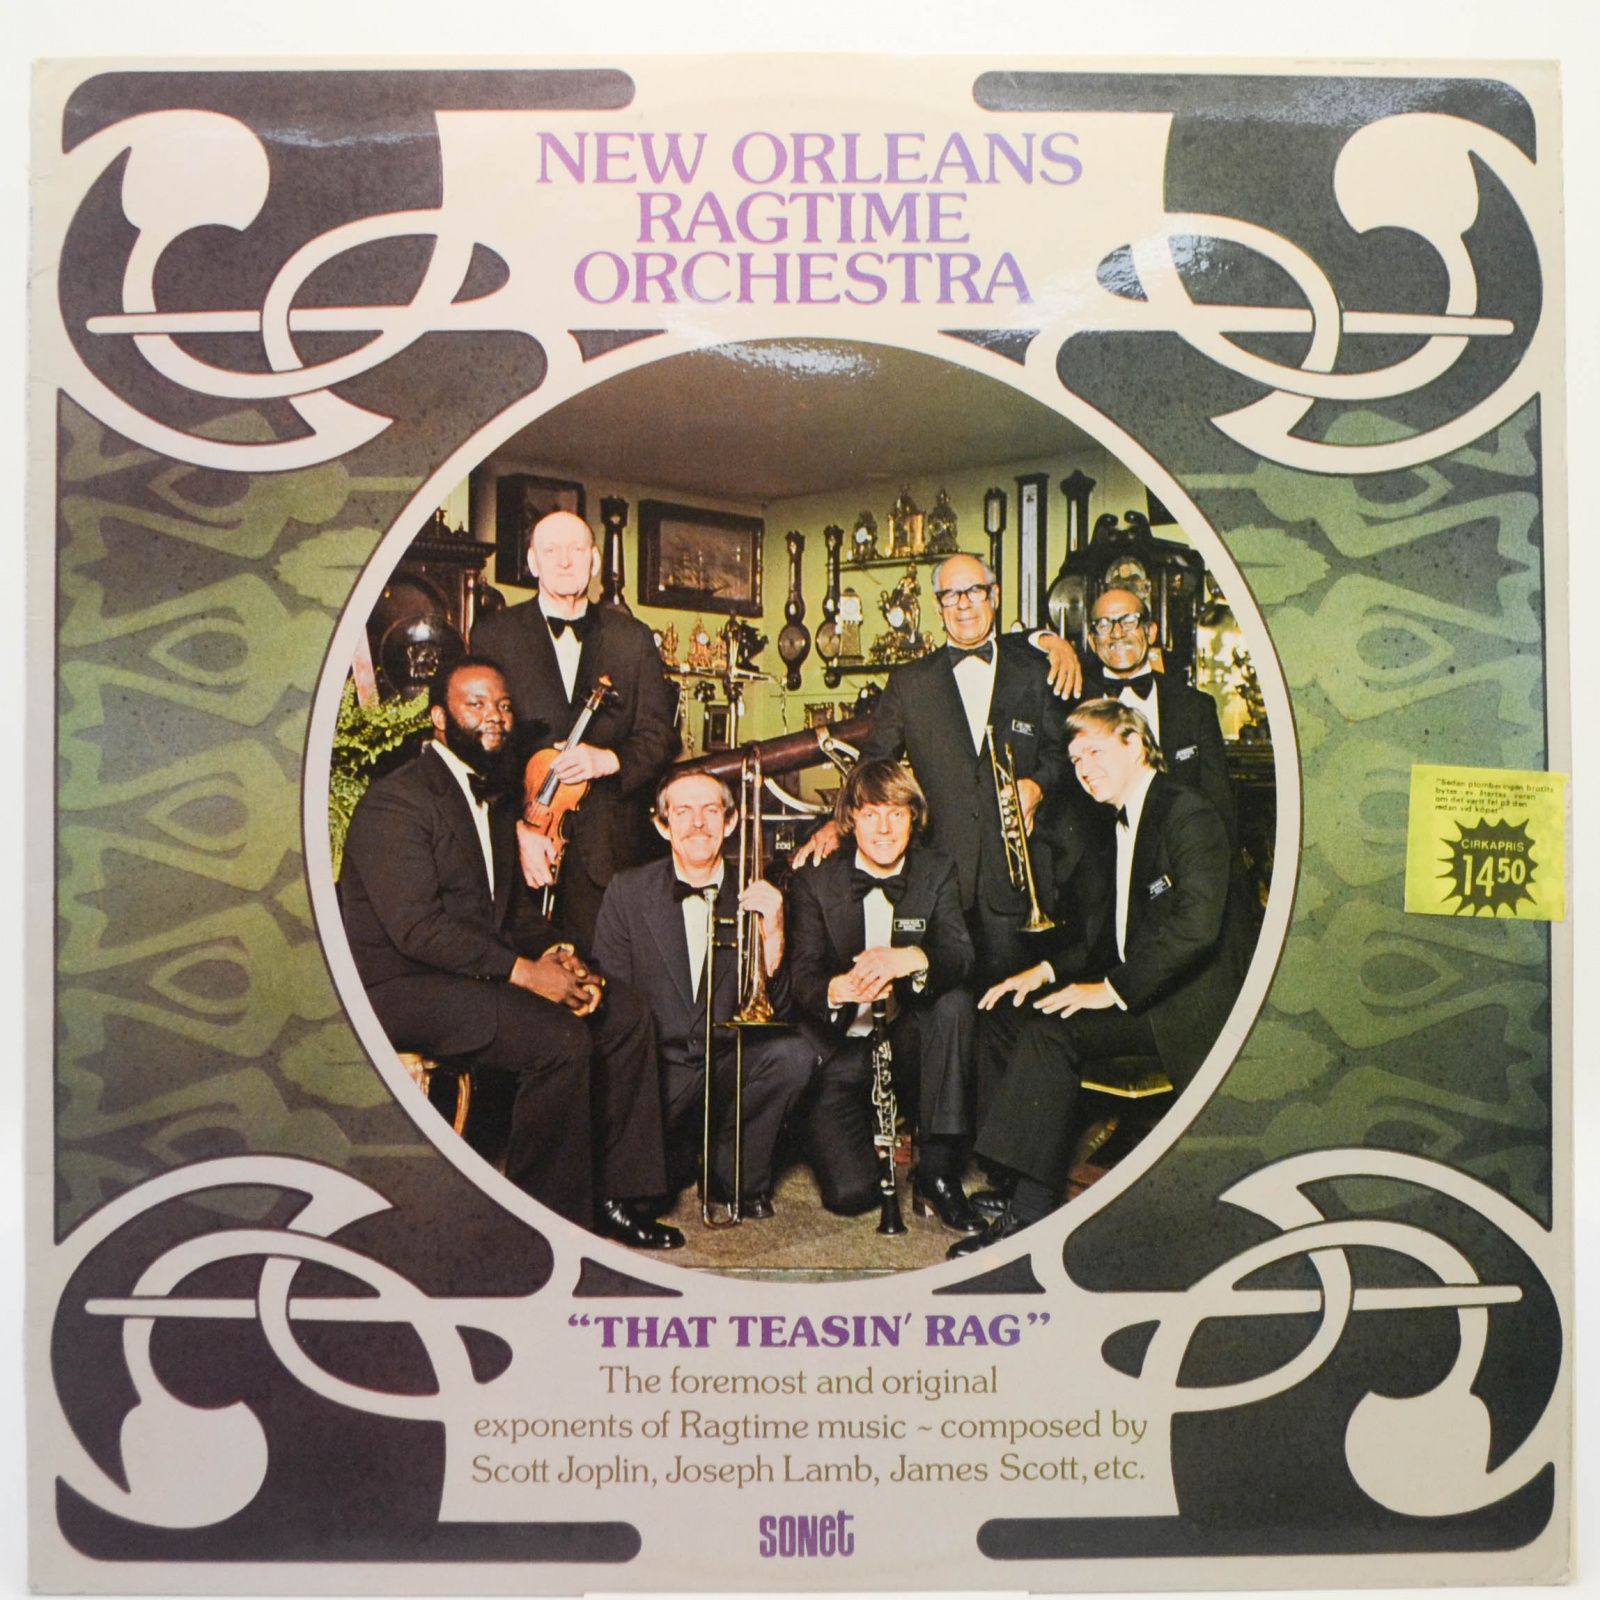 The New Orleans Ragtime Orchestra (UK), 1974